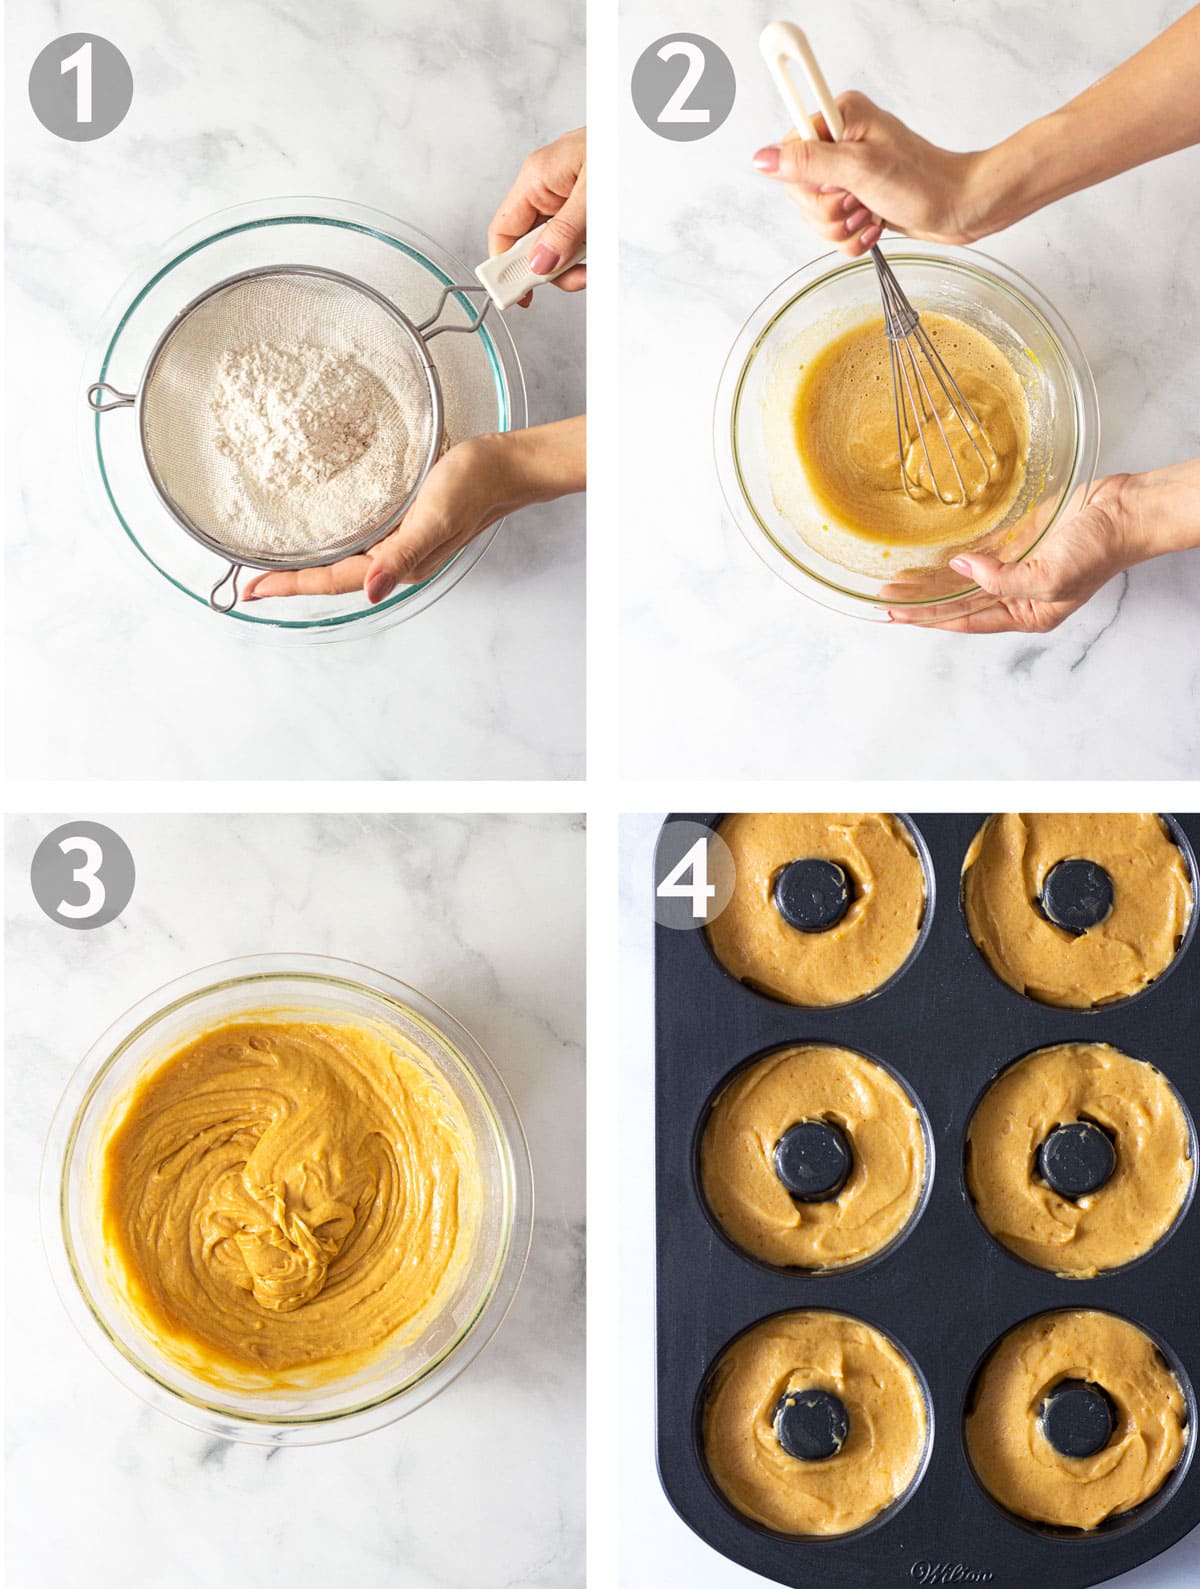 Pumpkin donut steps including sifting dry ingredients, mixing wet ingredients, combining all ingredients and baking donuts.